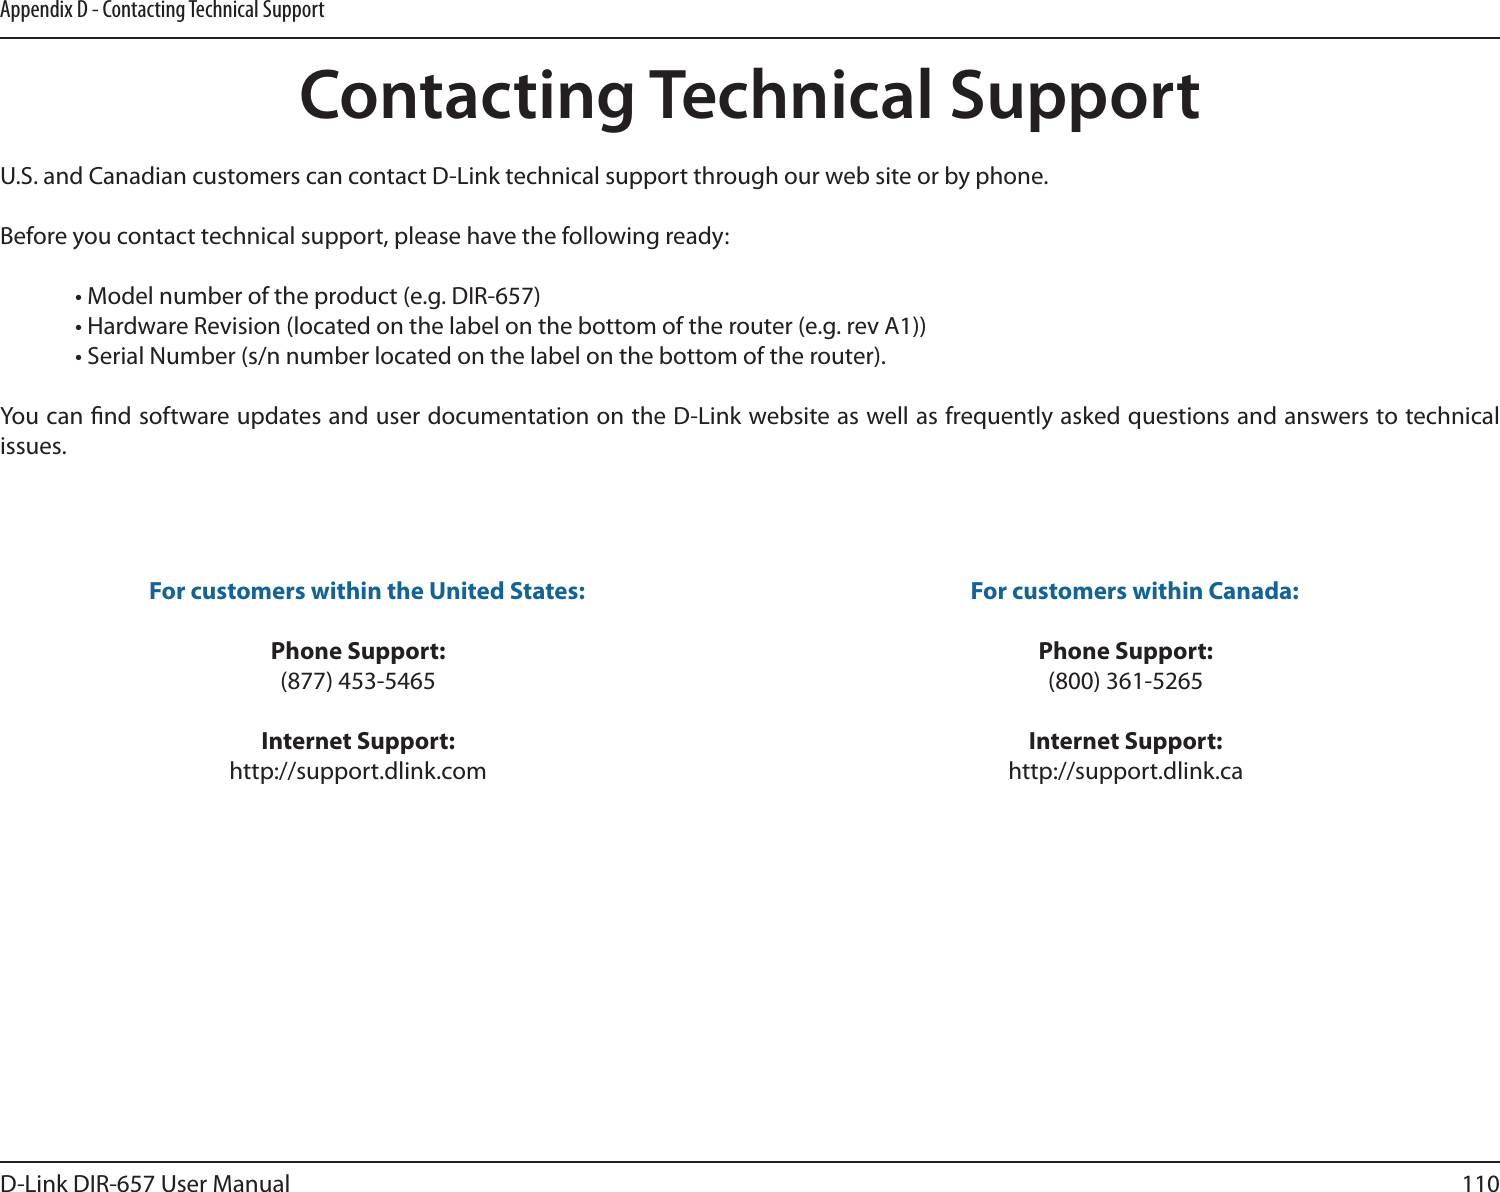 110D-Link DIR-657 User ManualAppendix D - Contacting Technical SupportContacting Technical SupportU.S. and Canadian customers can contact D-Link technical support through our web site or by phone.Before you contact technical support, please have the following ready:  • Model number of the product (e.g. DIR-657)  • Hardware Revision (located on the label on the bottom of the router (e.g. rev A1))  • Serial Number (s/n number located on the label on the bottom of the router). You can nd software updates and user documentation on the D-Link website as well as frequently asked questions and answers to technical issues.For customers within the United States: Phone Support:(877) 453-5465Internet Support:http://support.dlink.com For customers within Canada: Phone Support:(800) 361-5265 Internet Support:http://support.dlink.ca